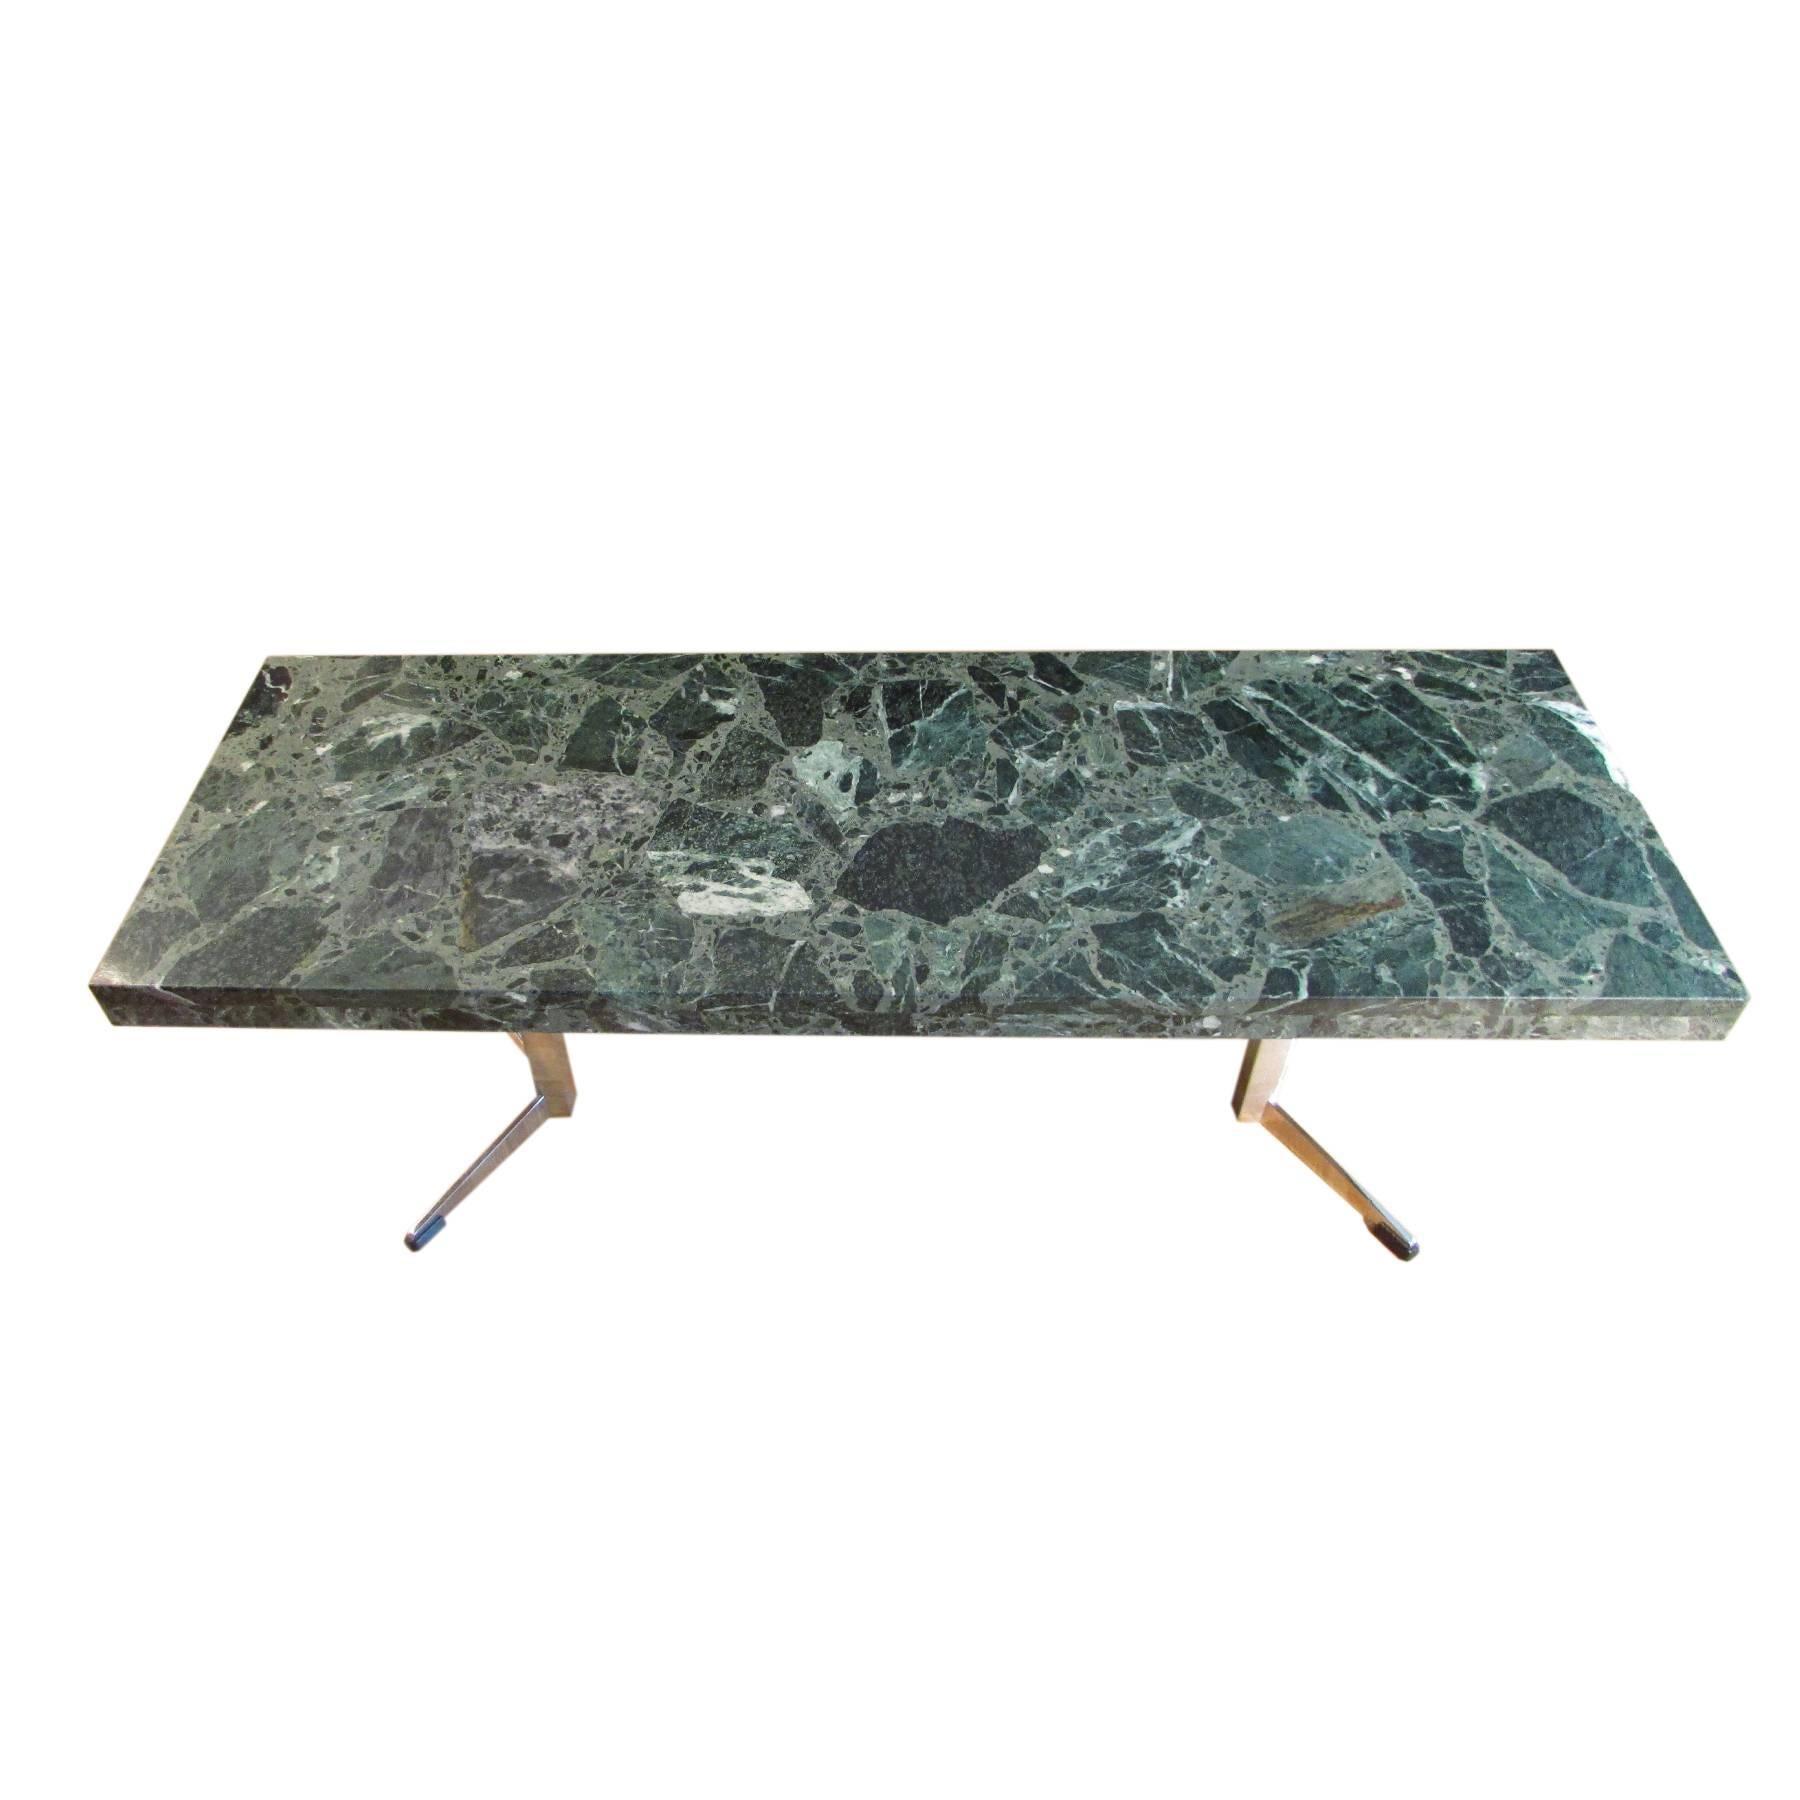 Nice coffee table with green marble top and chromed V-shaped feet.
The marble has a very nice design and the chromed feet help to give a 